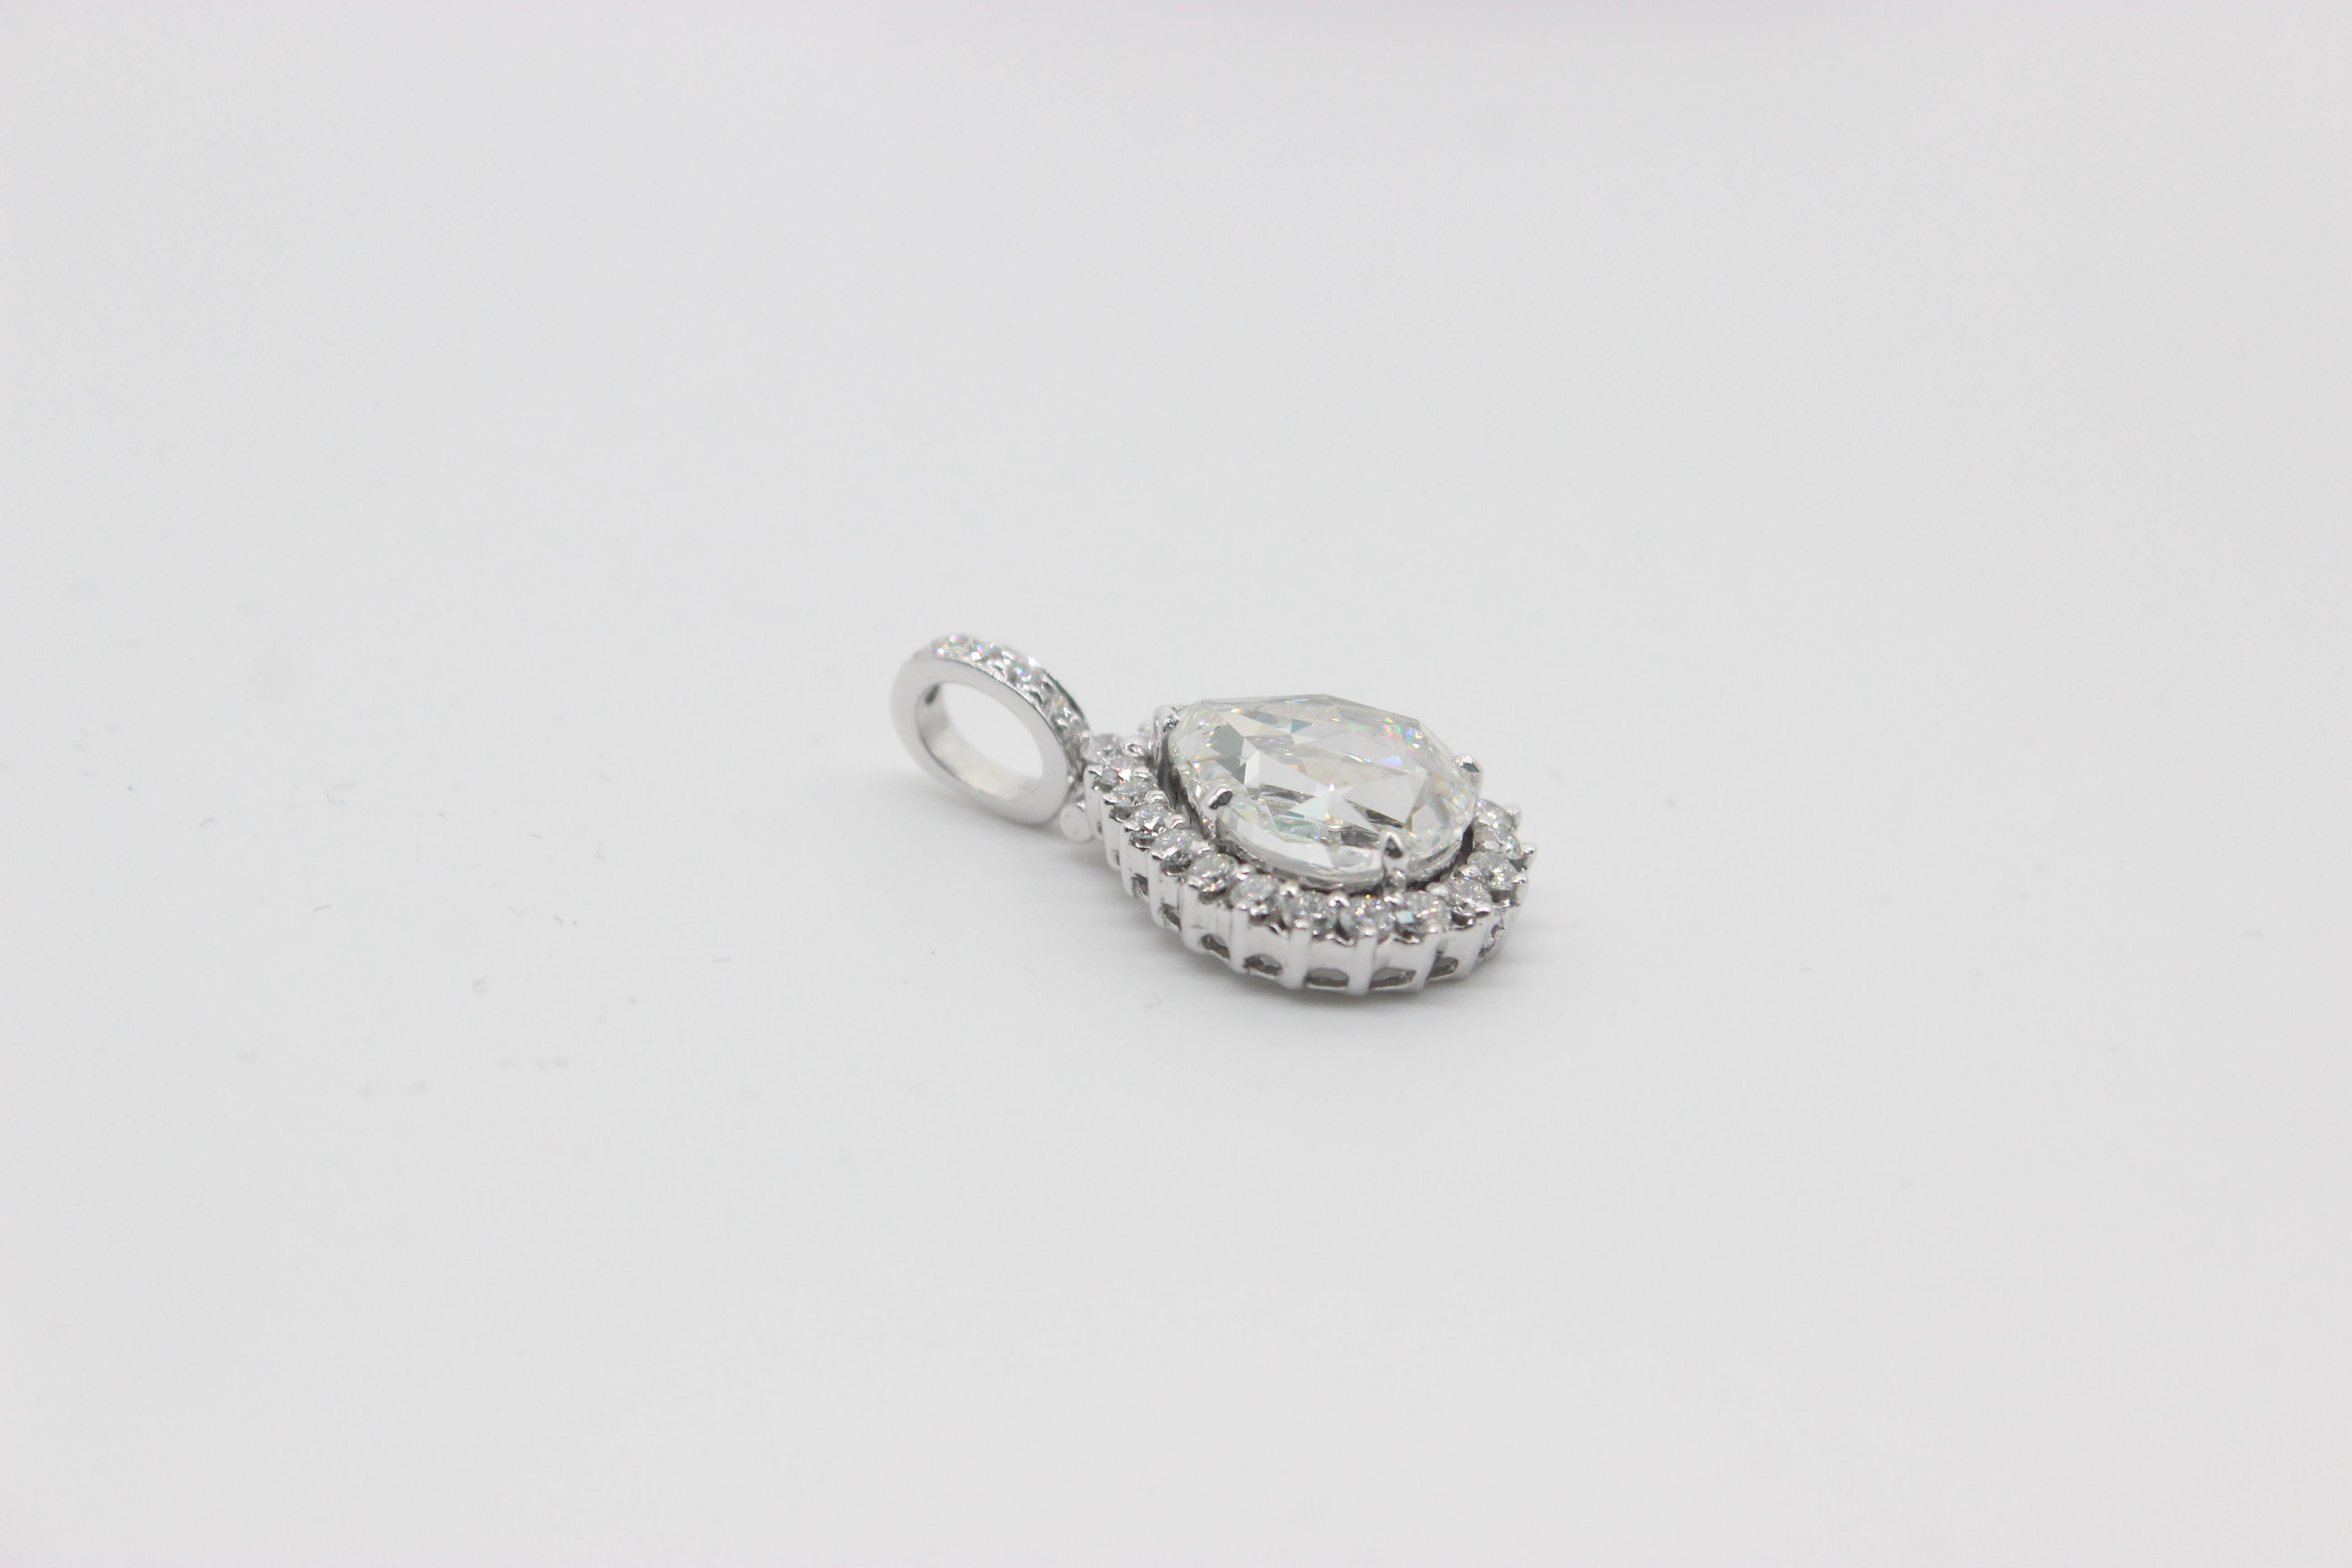 PANIM 3.35 Carat Rosecut Diamond 18k White Gold Pendant

Subtle but attractive ,This Panim rosecut pendant is a timeless piece of jewellery. It has a 3.35 ct. total weight of diamonds,having a 2.51 cts pear-shaped rosecut diamond center stone.